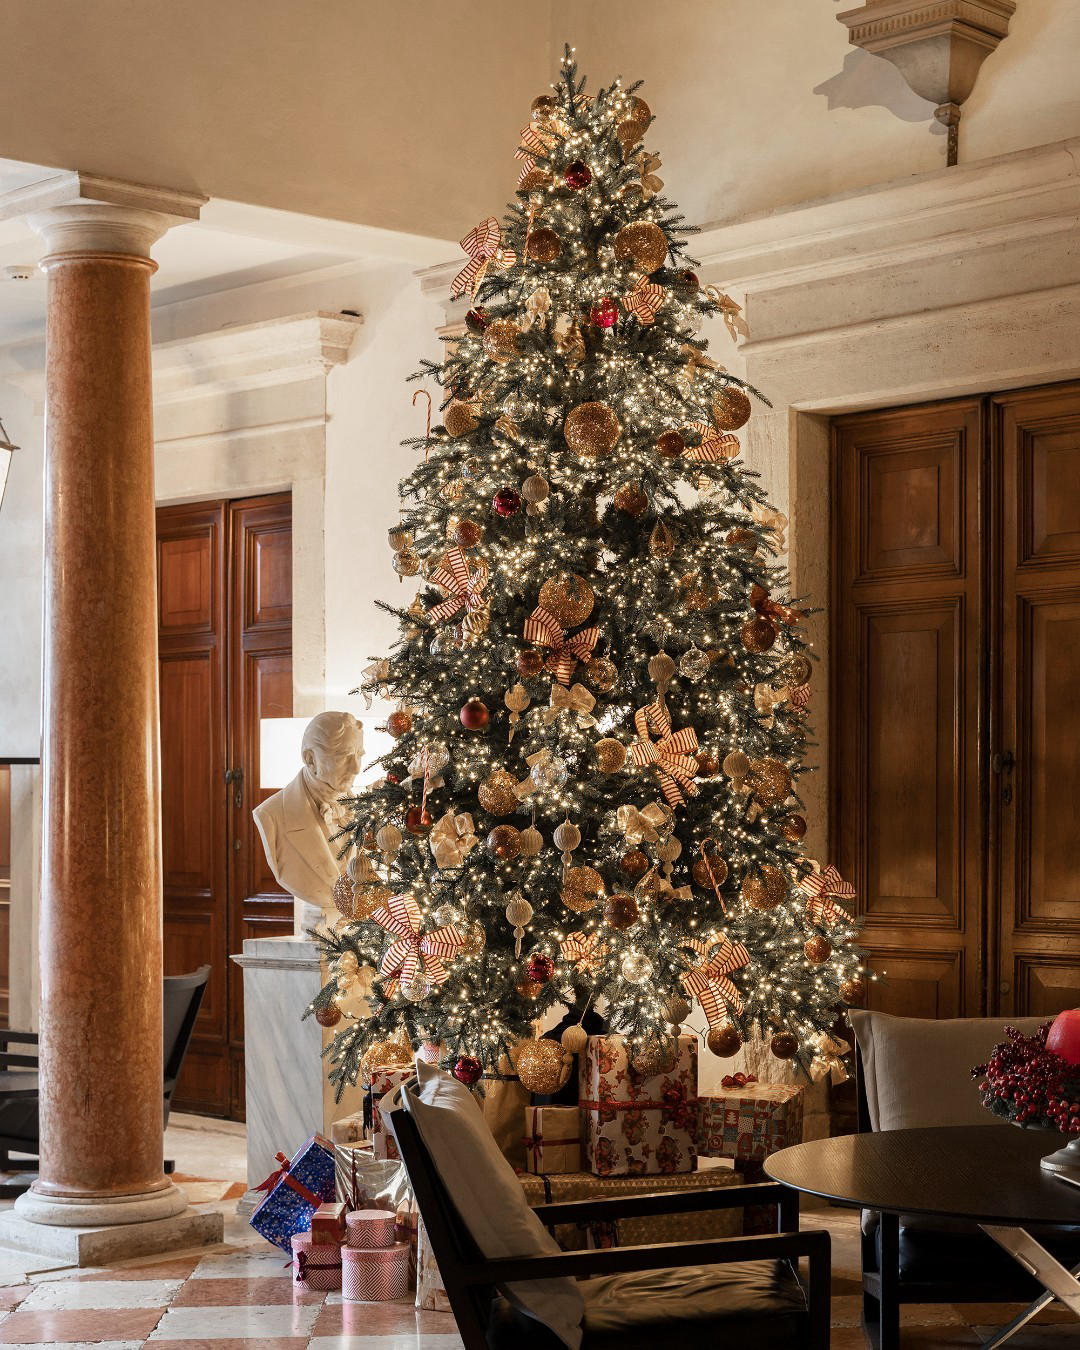 Aman Venice - Wishing all our guests and followers a happy, healthy and truly magical Christmas